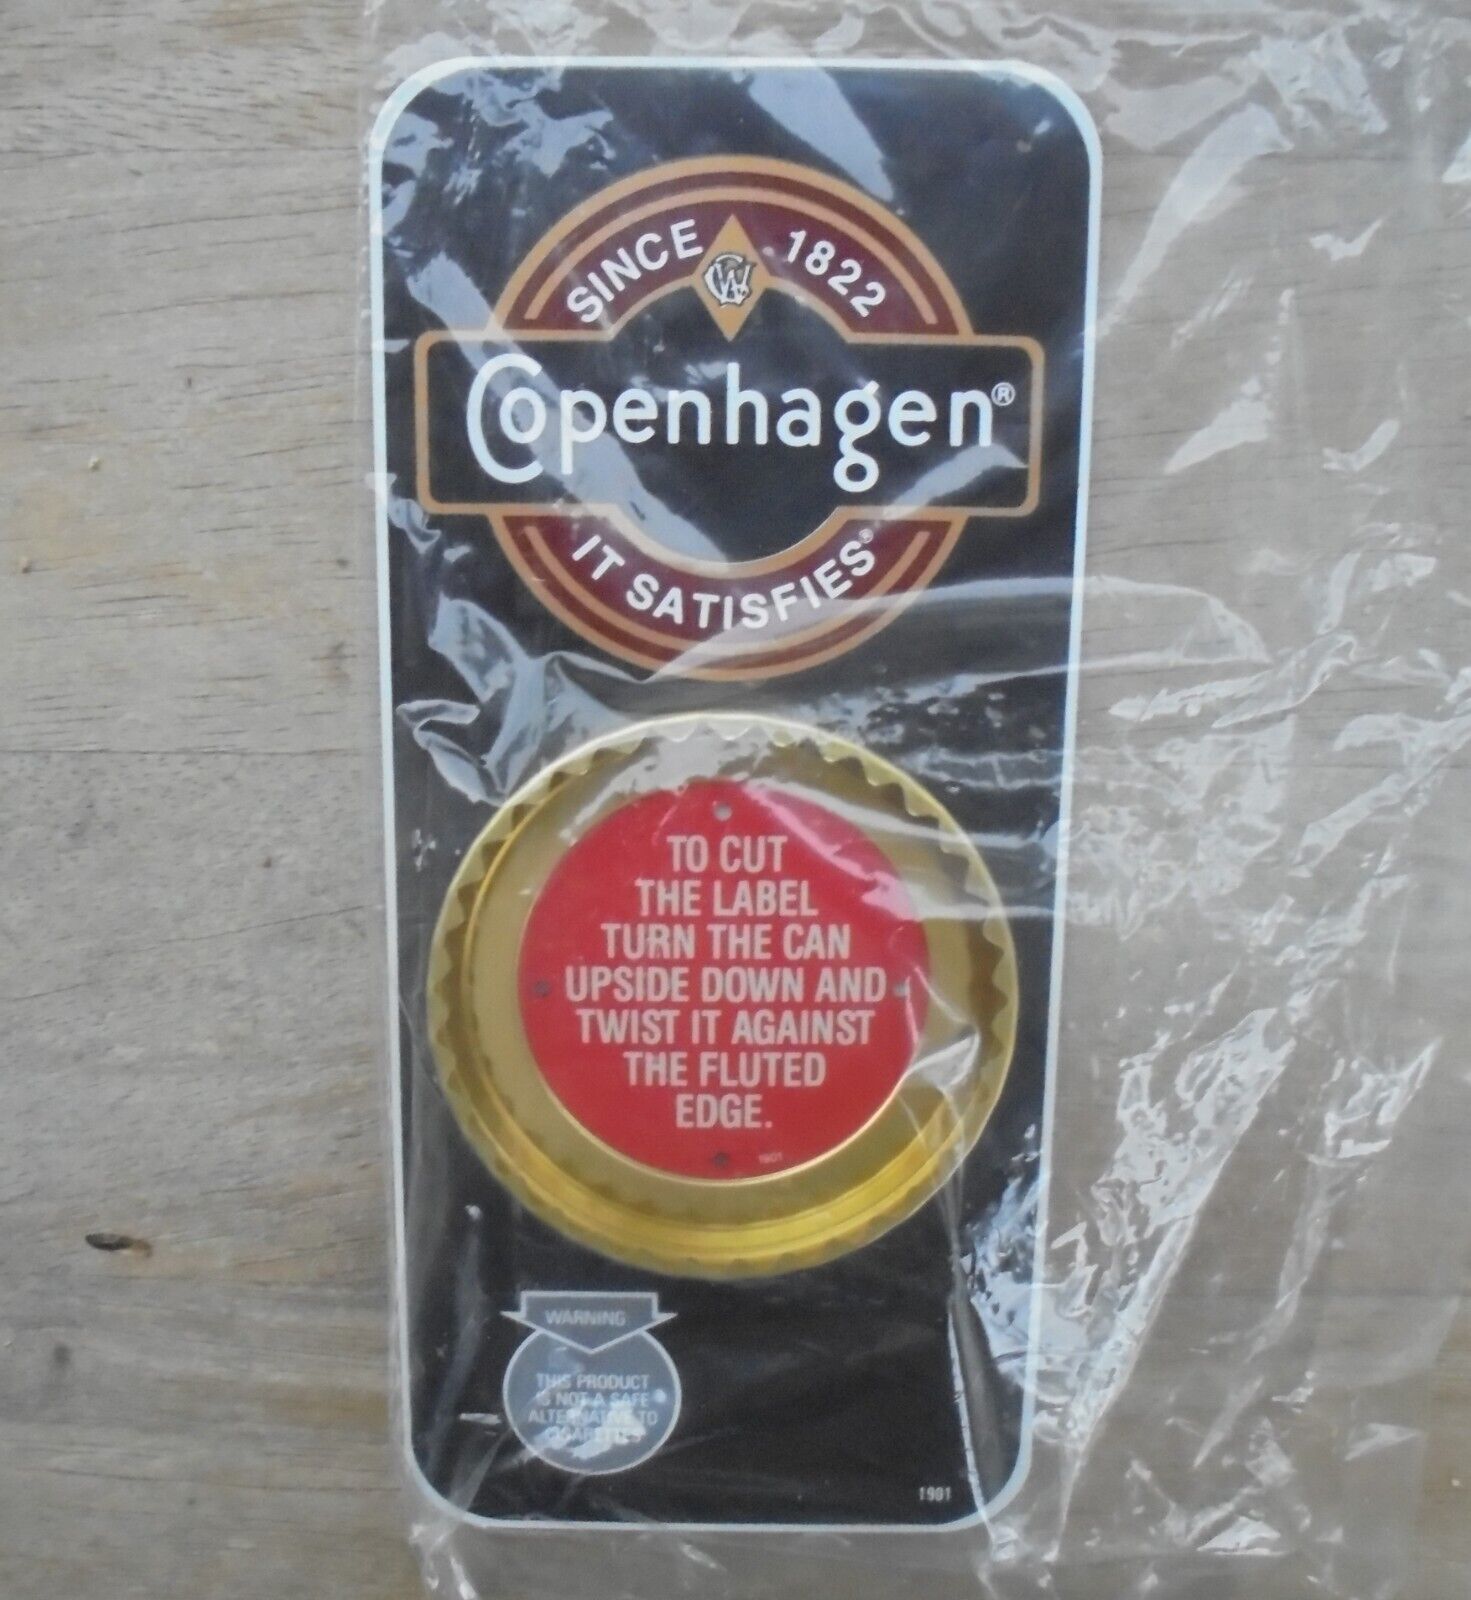 Copenhagen snuff tobacco can lid cutter sign/opener for wall or counter NEW